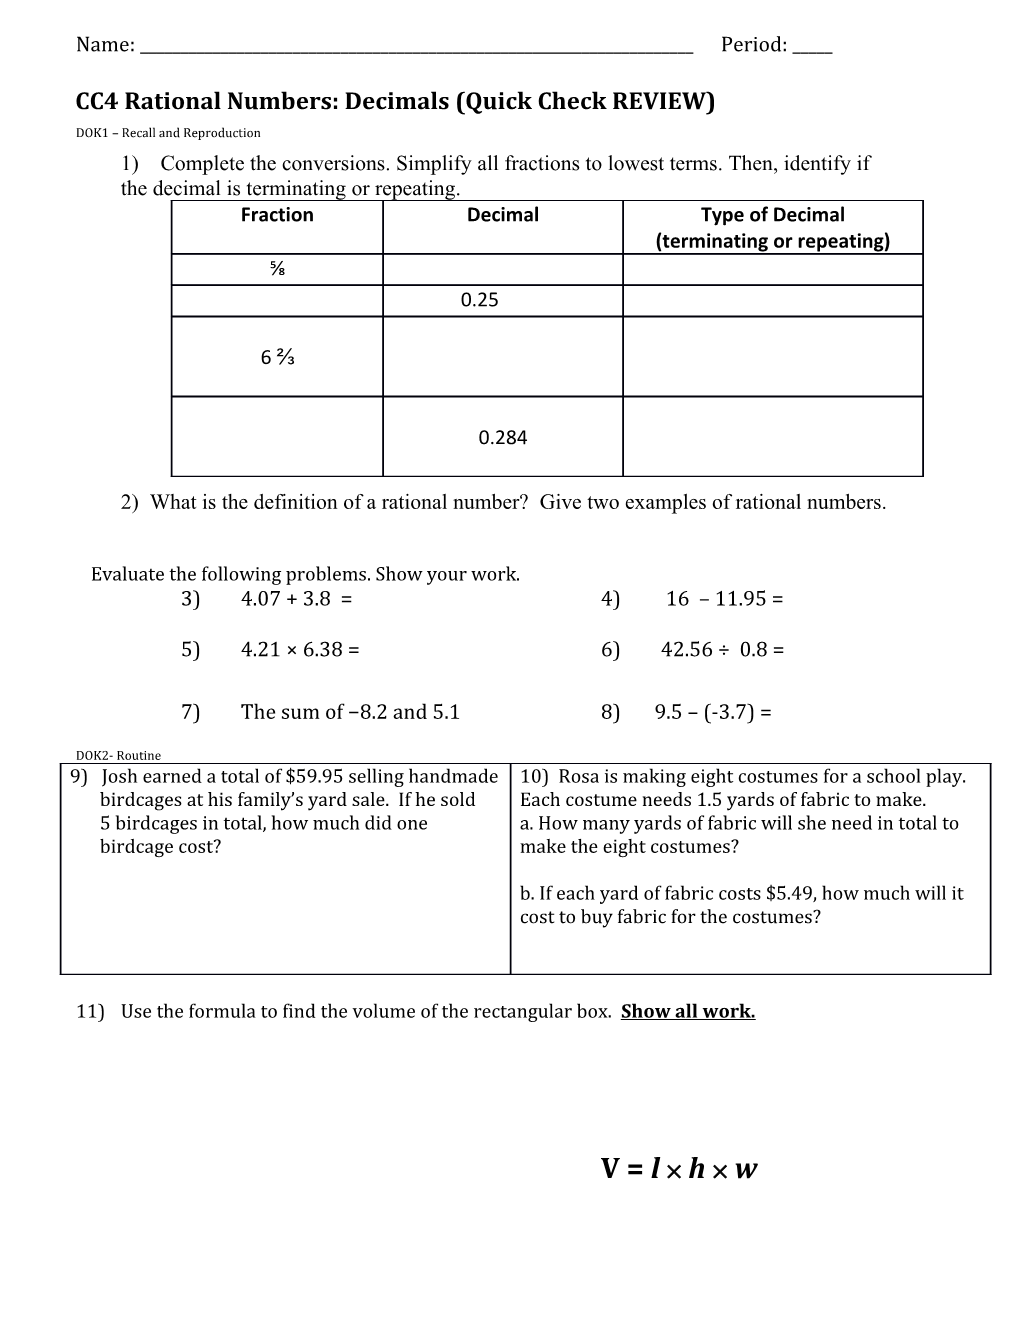 CC4 Rational Numbers: Decimals (Quick Check REVIEW)